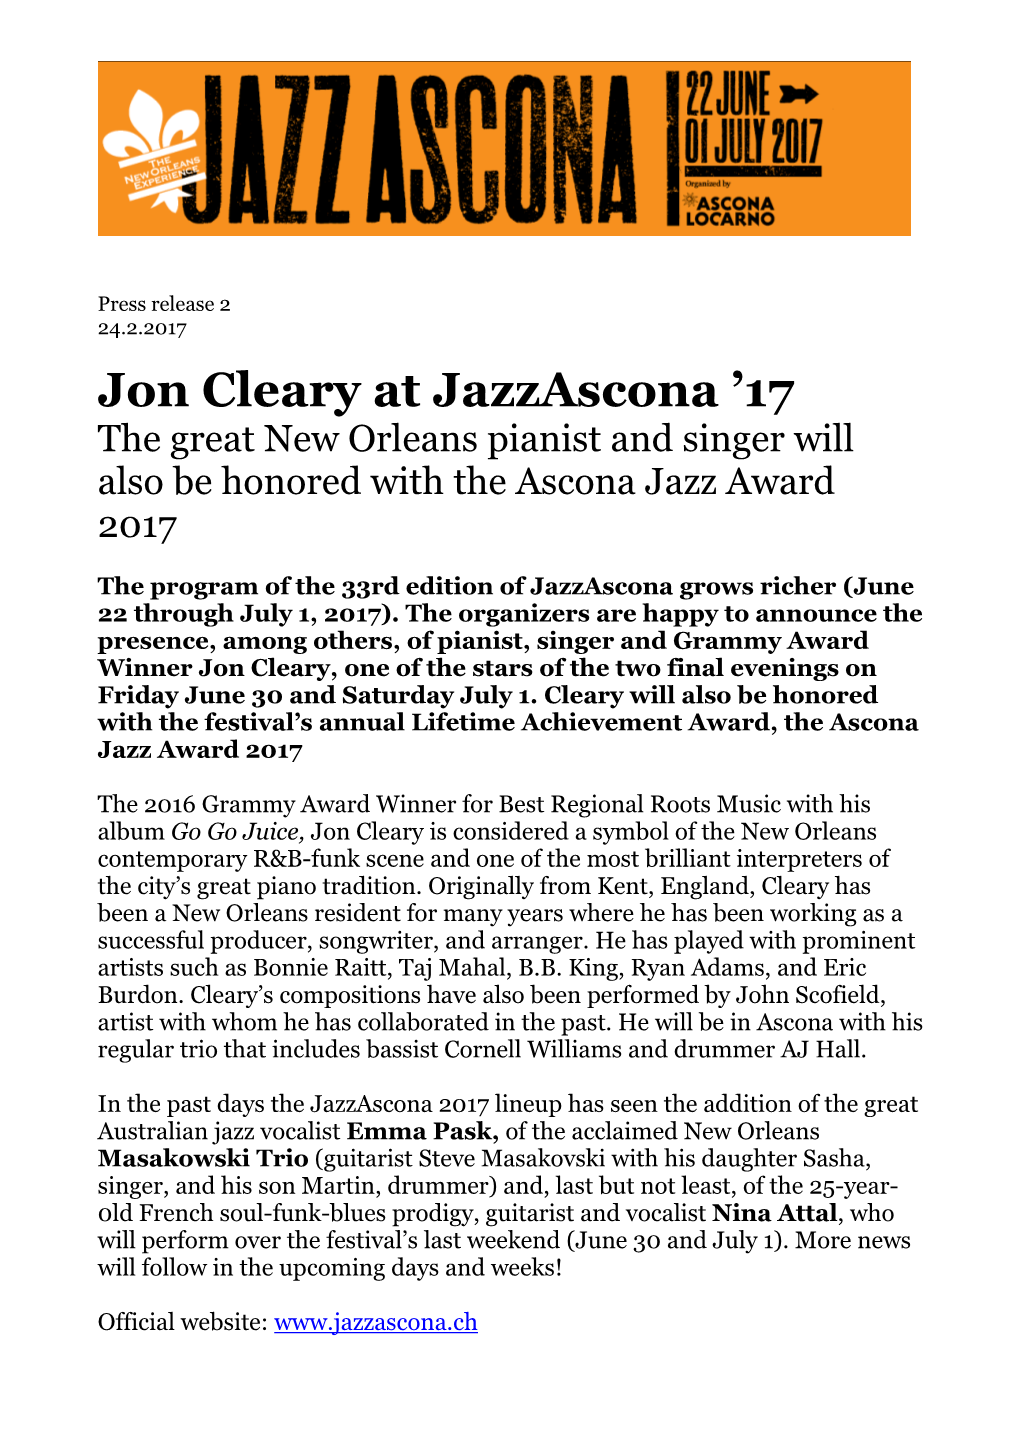 Jon Cleary at Jazzascona ’17 the Great New Orleans Pianist and Singer Will Also Be Honored with the Ascona Jazz Award 2017